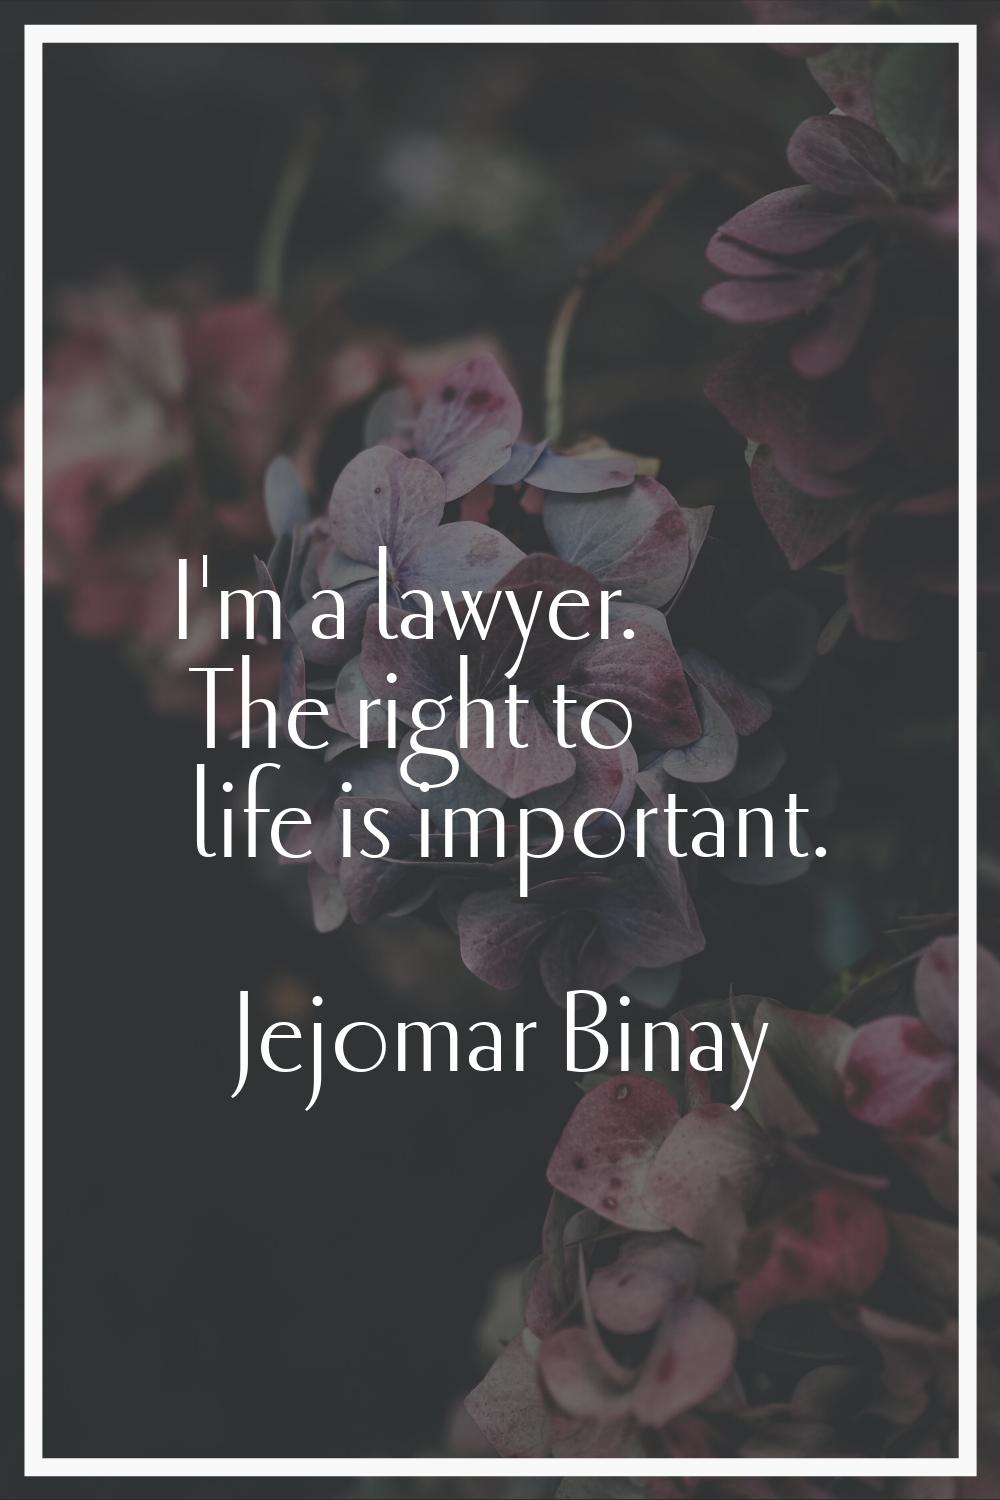 I'm a lawyer. The right to life is important.